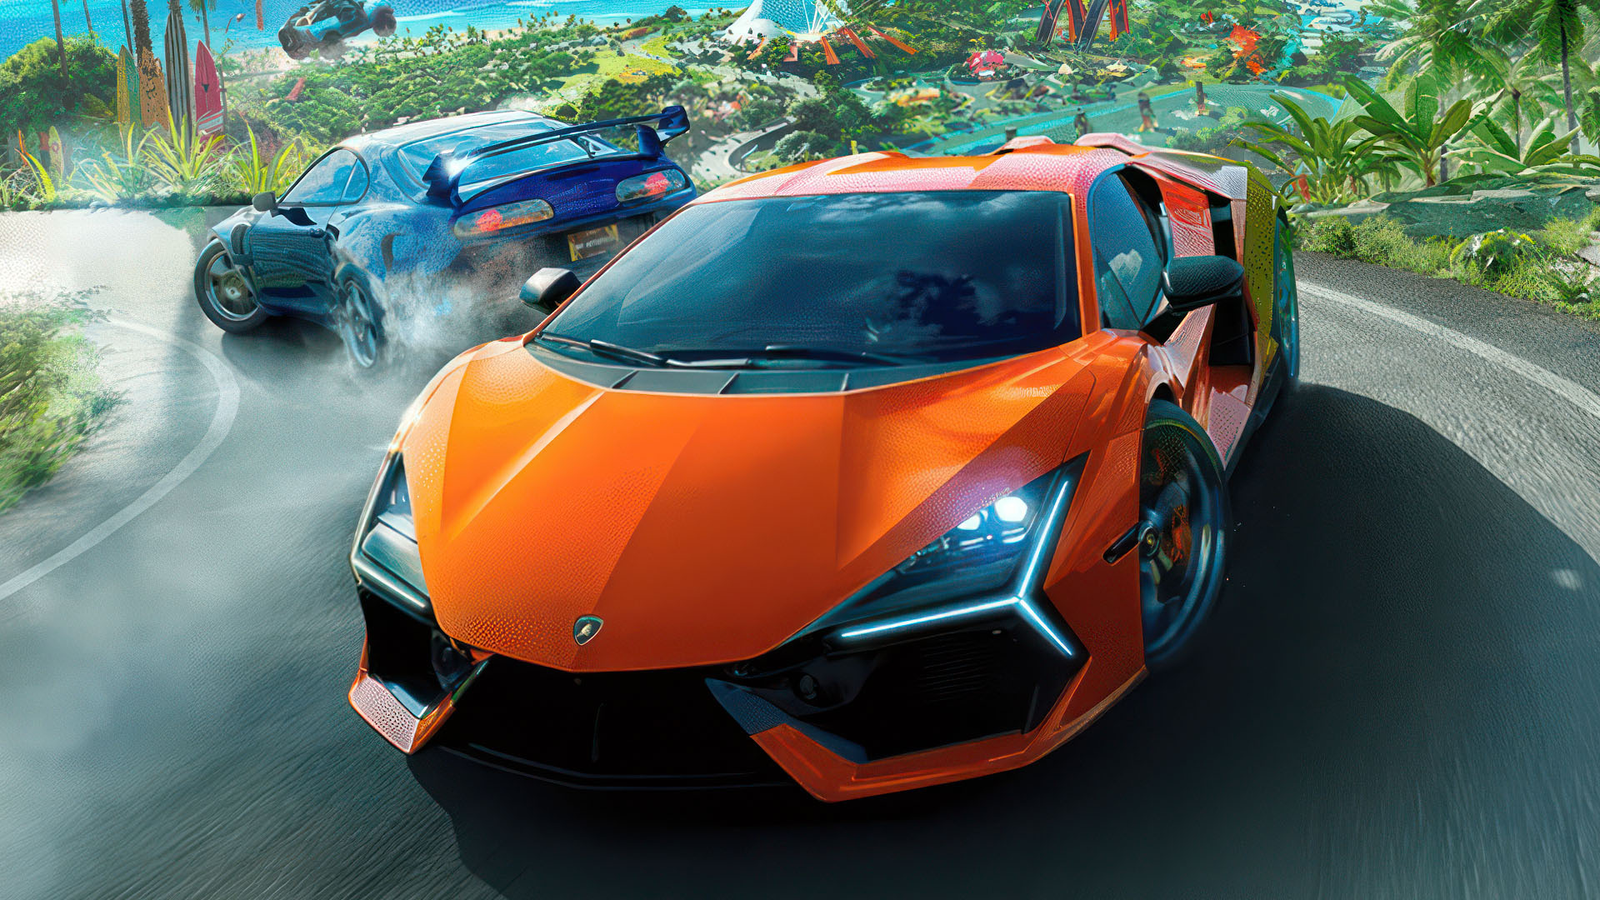 The Crew Motorfest tech review: genuine quality - but Series S is left  behind, the crew 3 